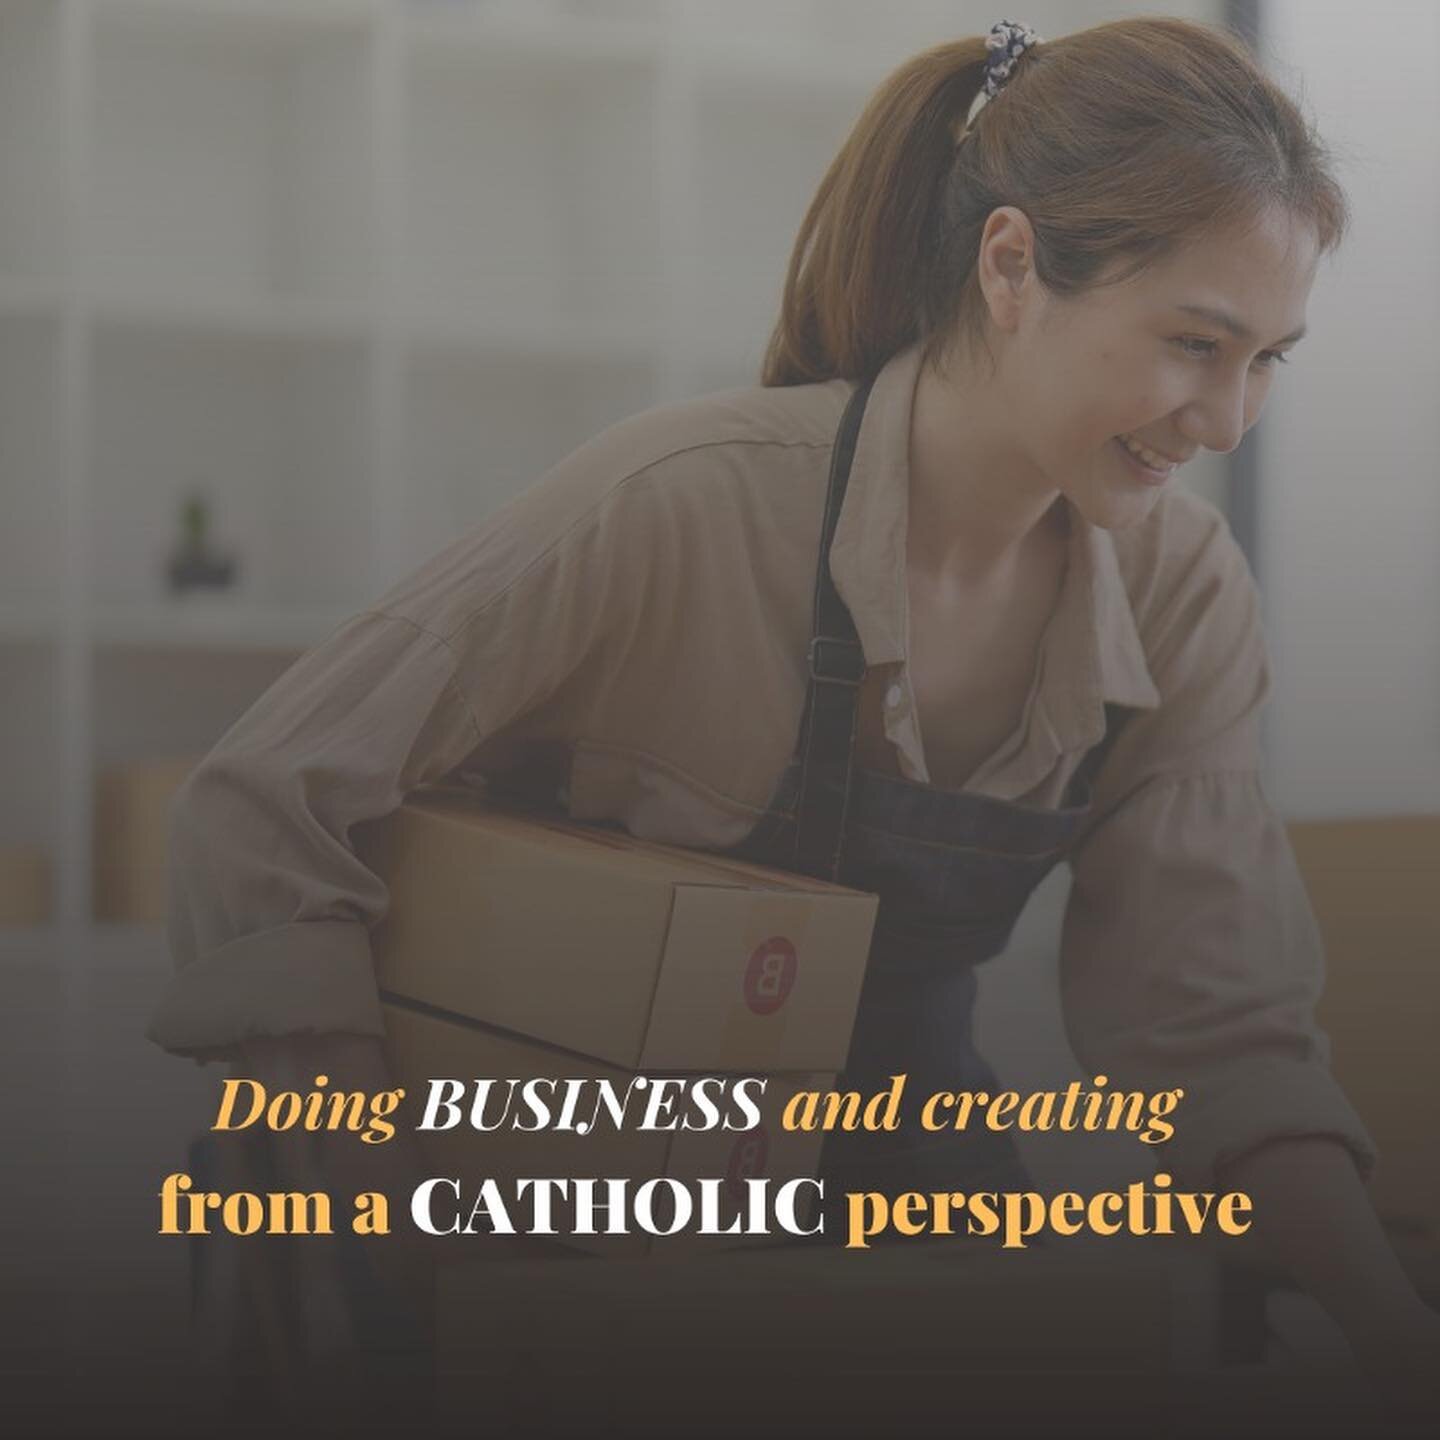 You don&rsquo;t need to put your values aside in order to do business, the Catholic Church has teachings on how our businesses should be conduced 🙏
.
#catholicbusiness #catholicshop #catholicstore